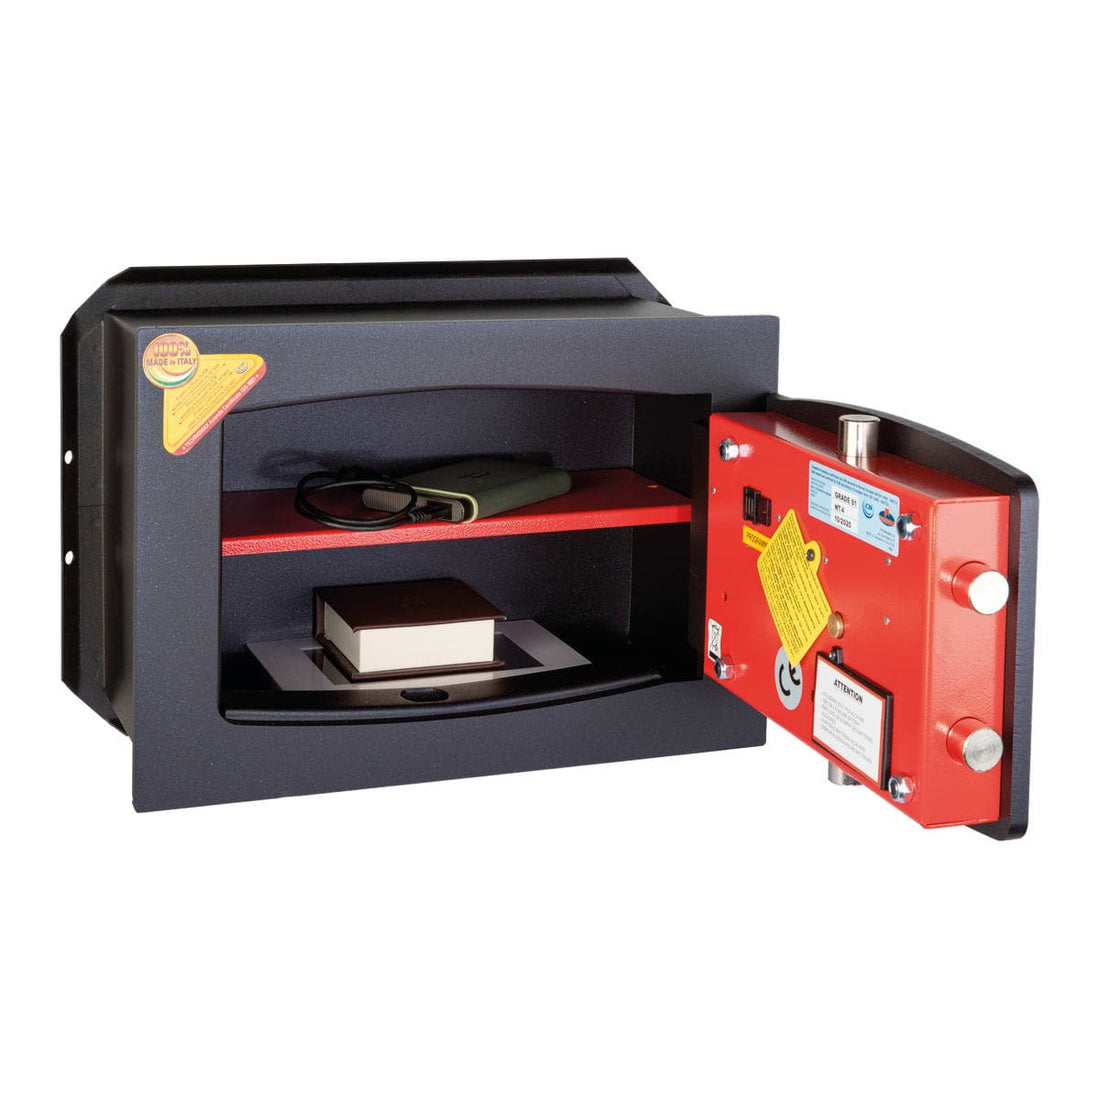 W.390xH.270xD.200 MM WALL SAFE, ELECTRONIC COMBINATION - best price from Maltashopper.com BR410430269